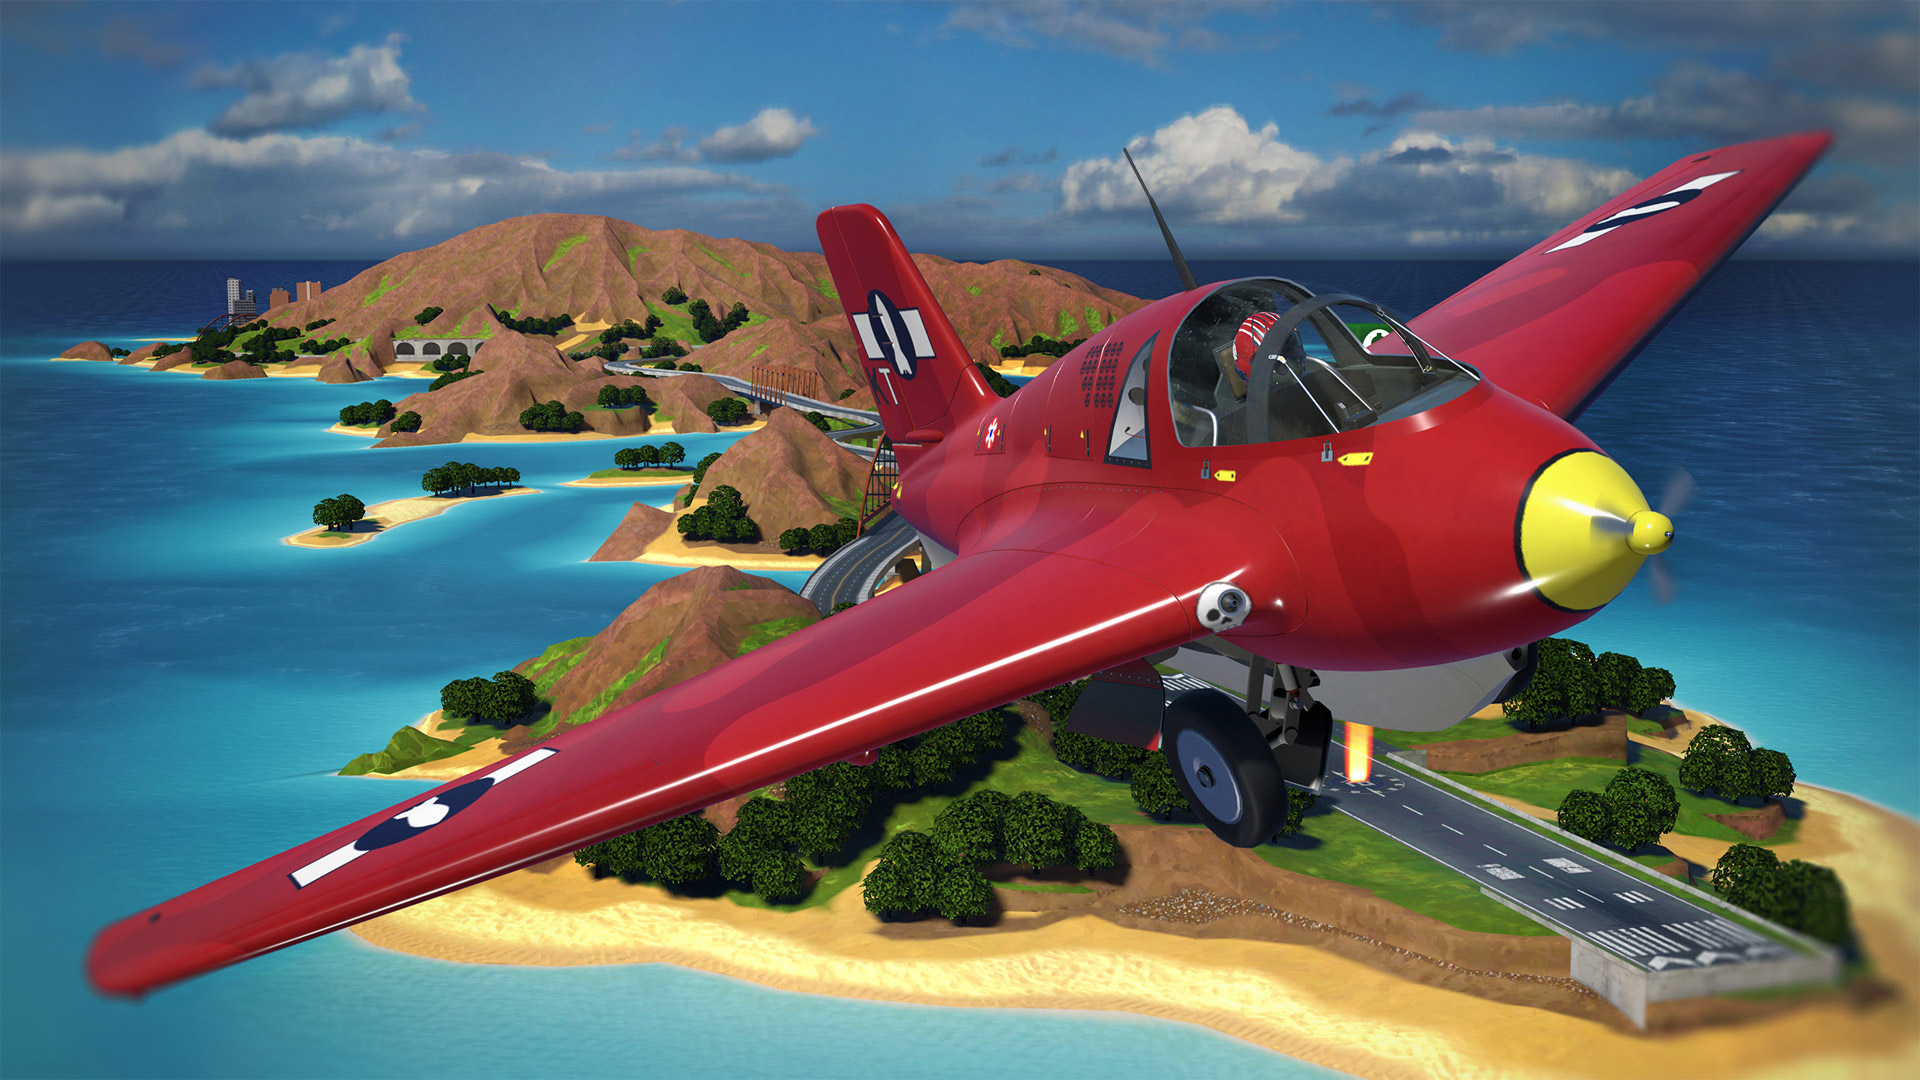 Ultrawings 2 Sold ’10x More’ on Quest Than PC VR, Says Developer